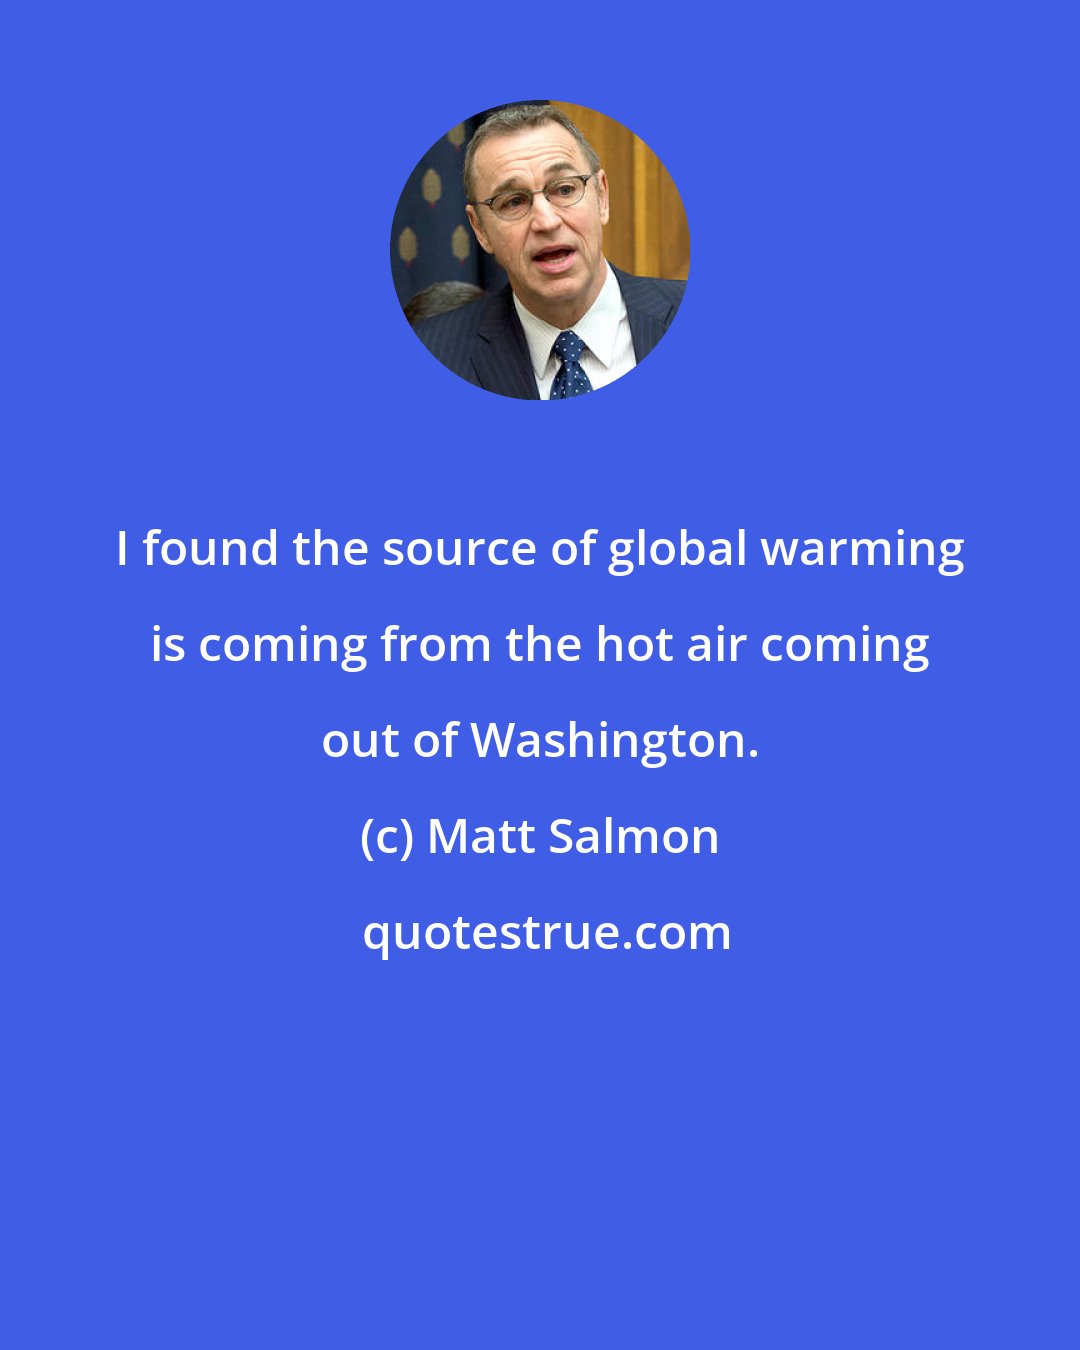 Matt Salmon: I found the source of global warming is coming from the hot air coming out of Washington.